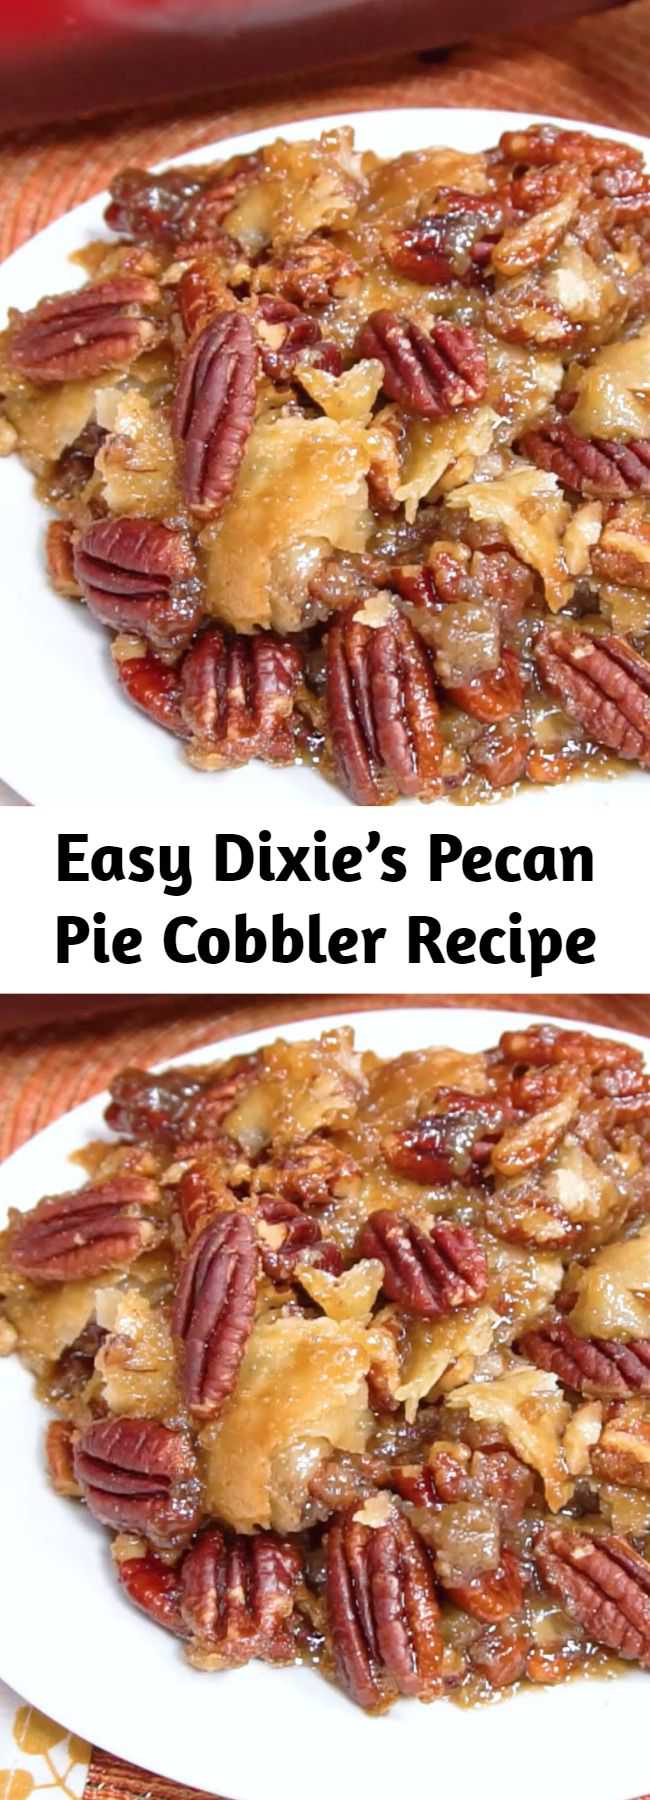 Easy Dixie’s Pecan Pie Cobbler Recipe - Dixie’s Pecan Pie Cobbler takes pecan pie to a whole new level! The bottom crust is topped with a delicious pecan custard, another crust and more pecans. After just one bite of Dixie’s Pecan Pie Cobbler, you will be hooked!